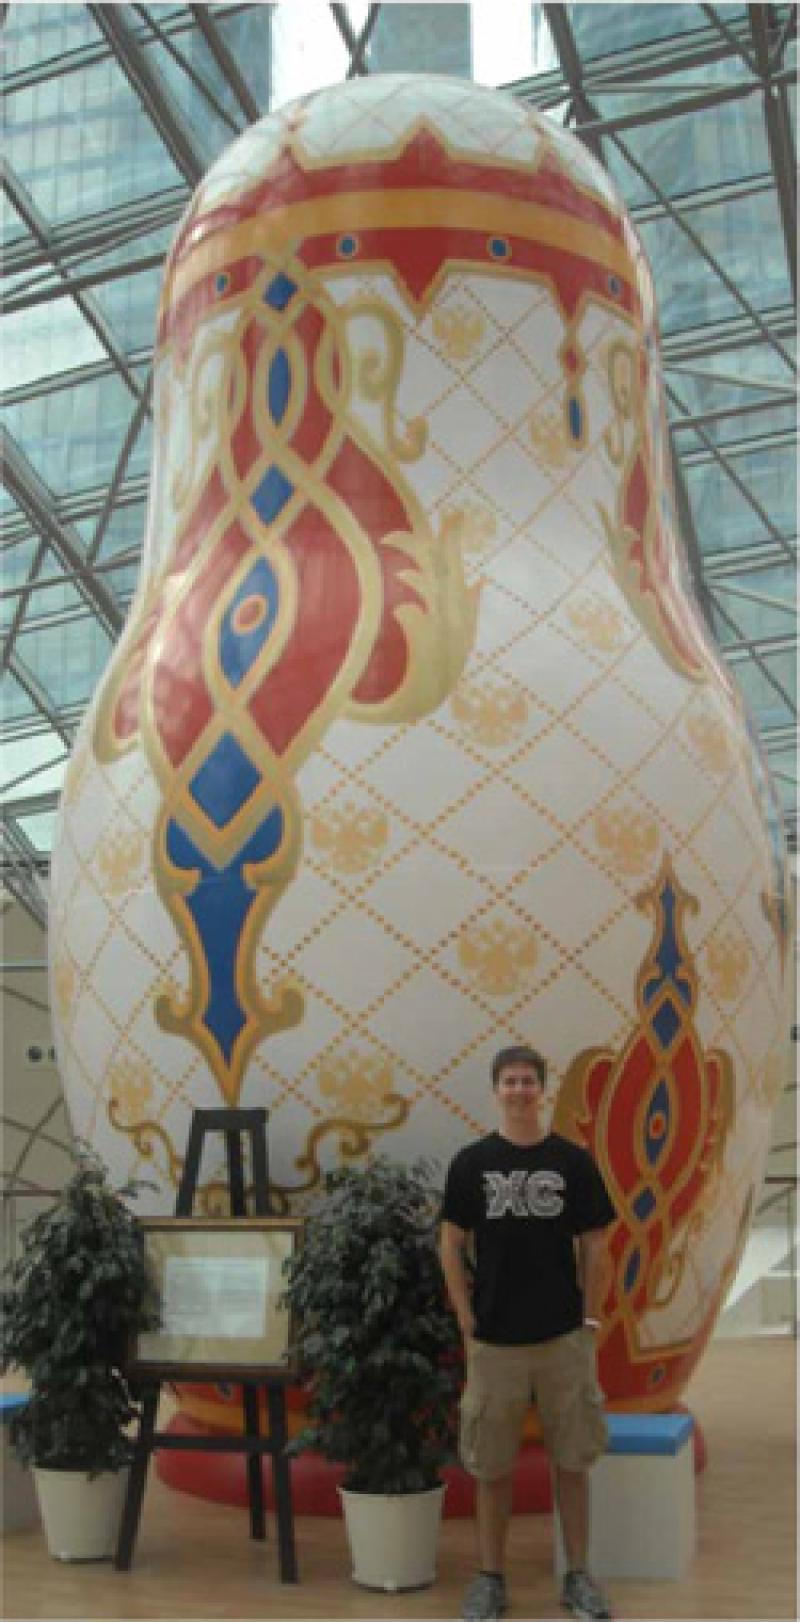 Alex Polivka in front of a gigantic Russian doll.